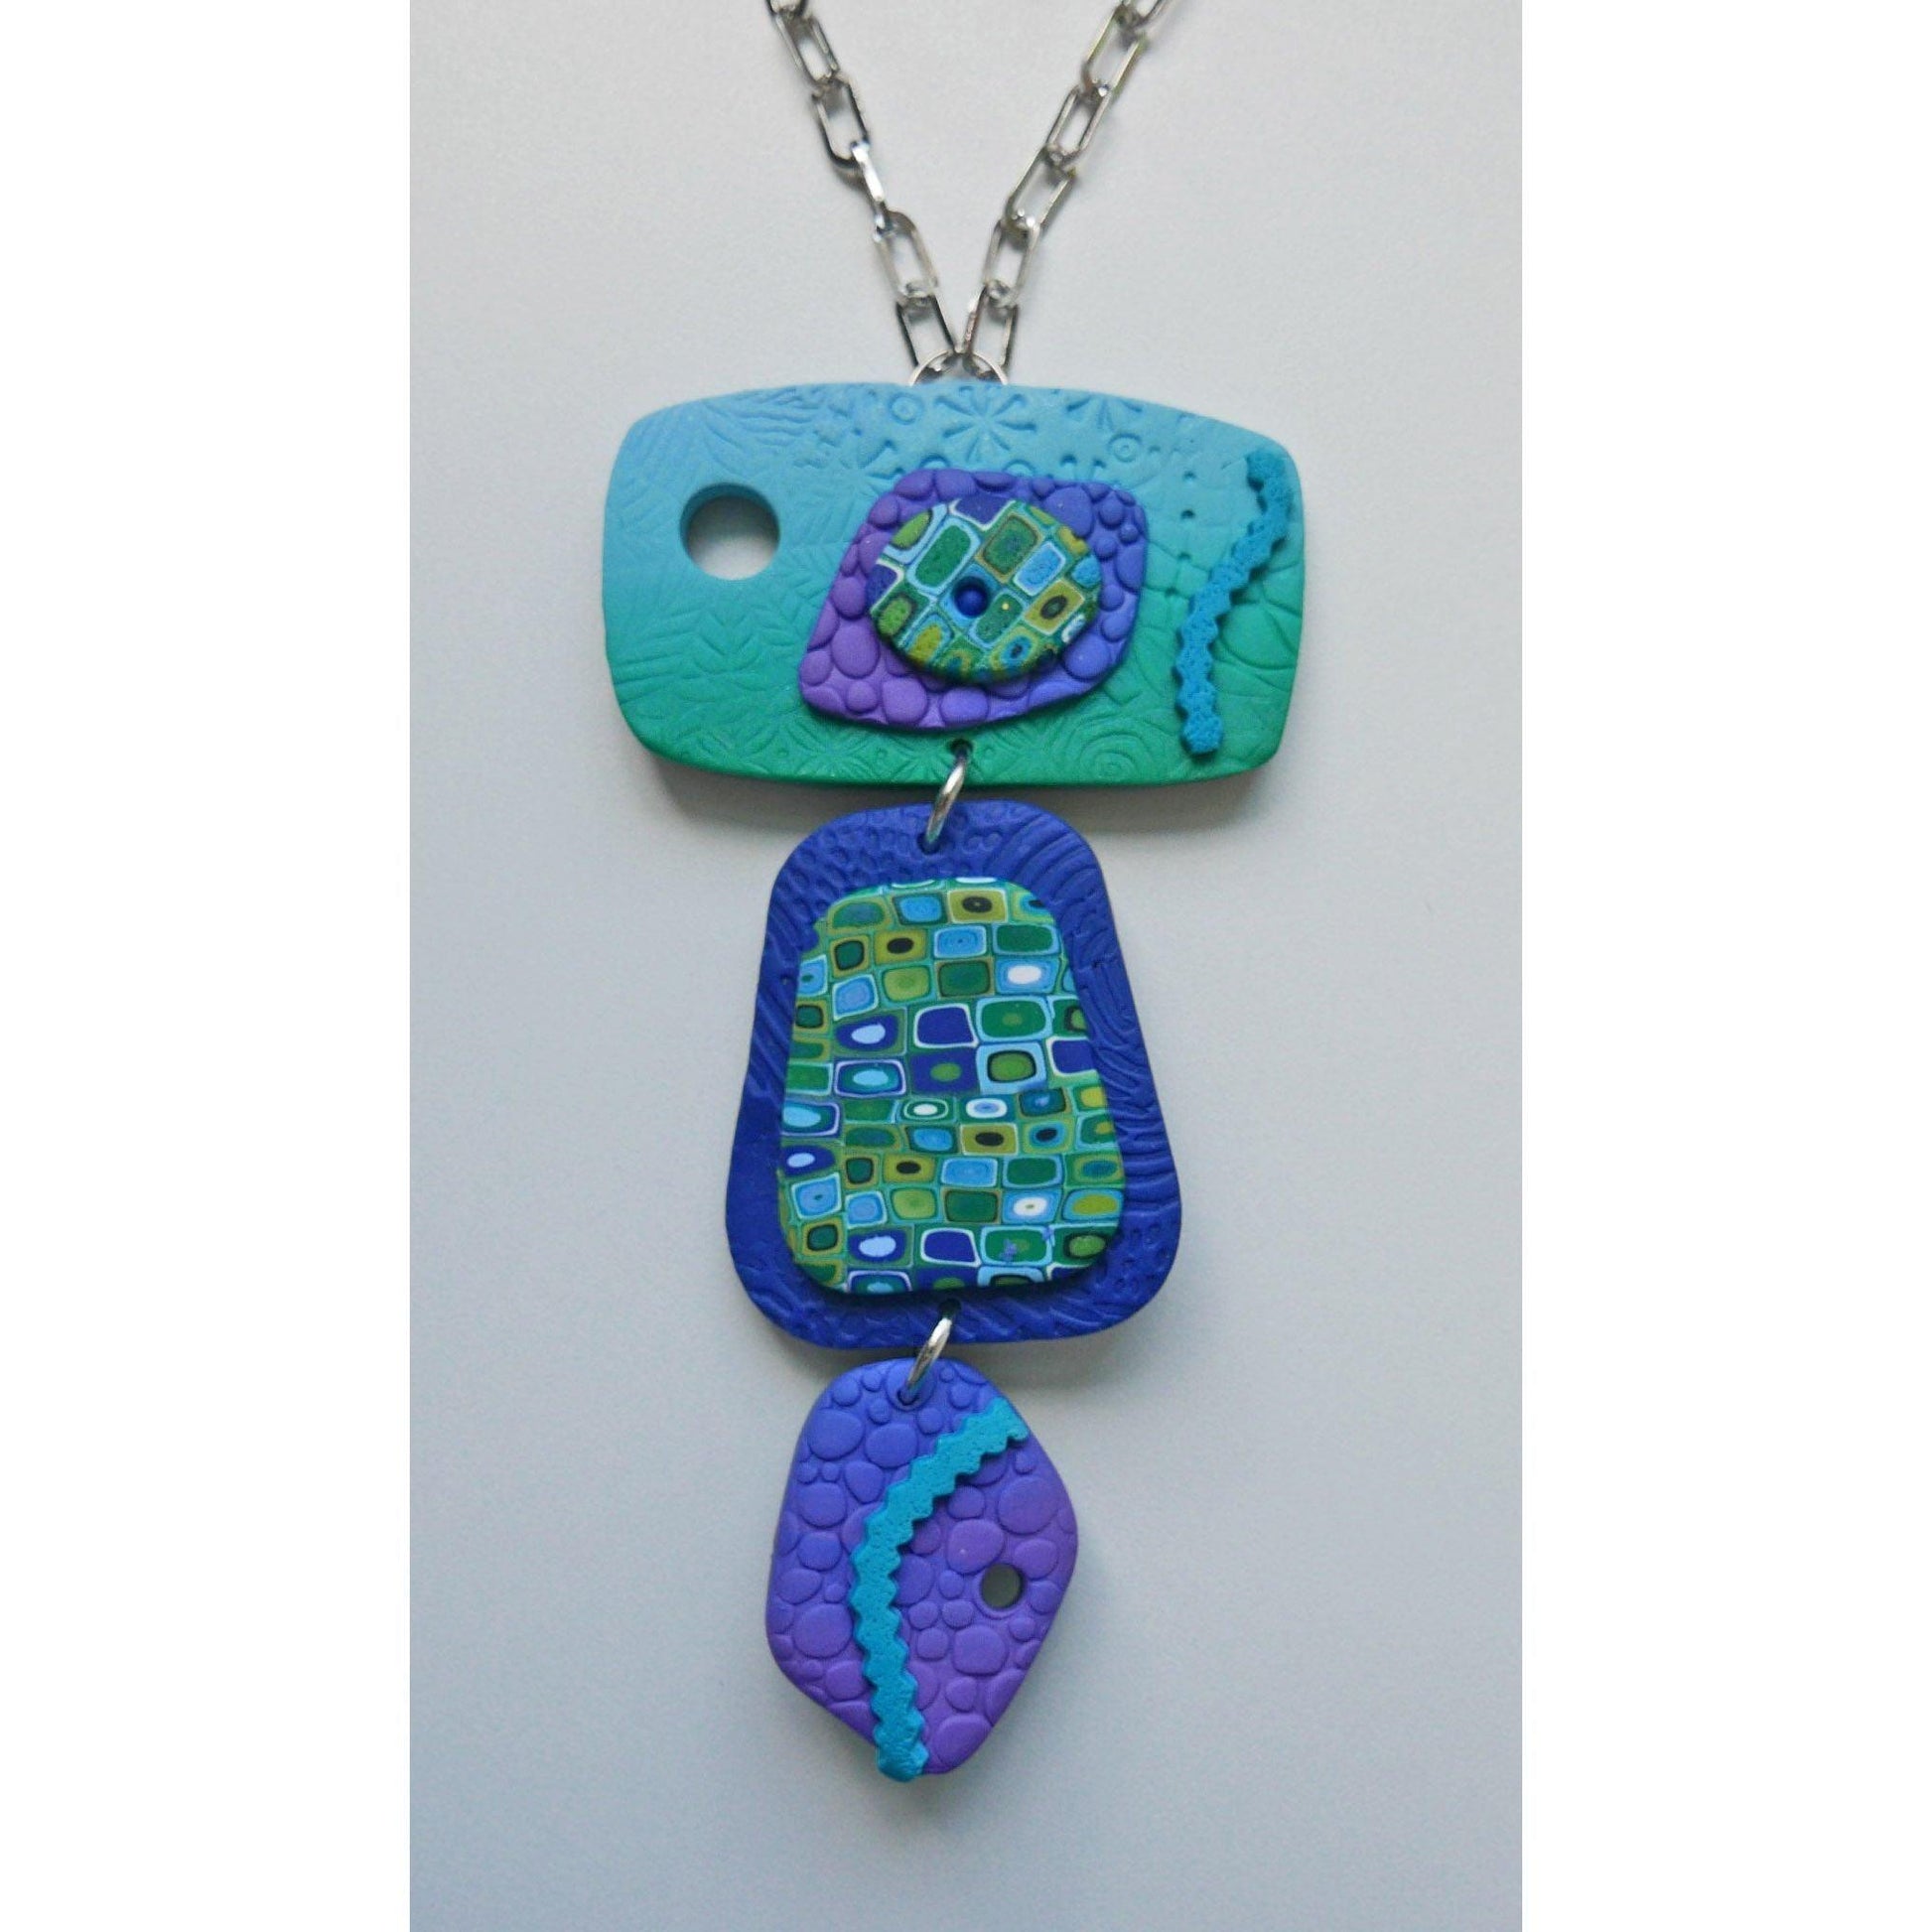 Mixed Medley Necklace - shades of blue green dot pattern - The Art of Lori Axelrod